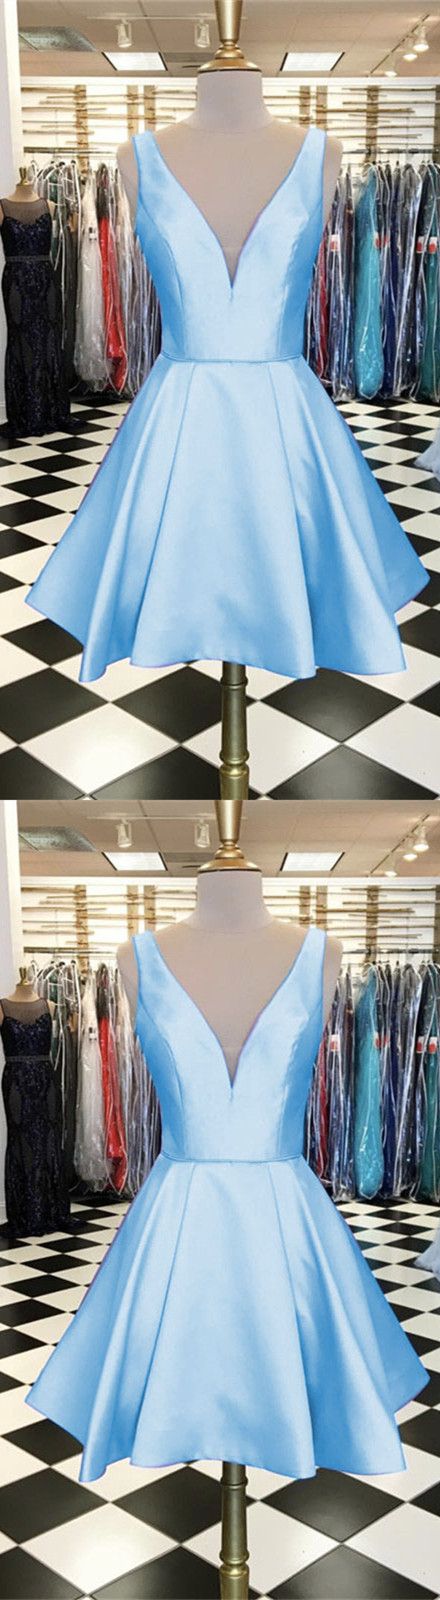 A-line V-neck Satin Homecoming Dresses Short Prom Gowns 2018,sky Blue Satin Mini Homecoming Dresses,custom Made Party Gowns .girls Gowns Short